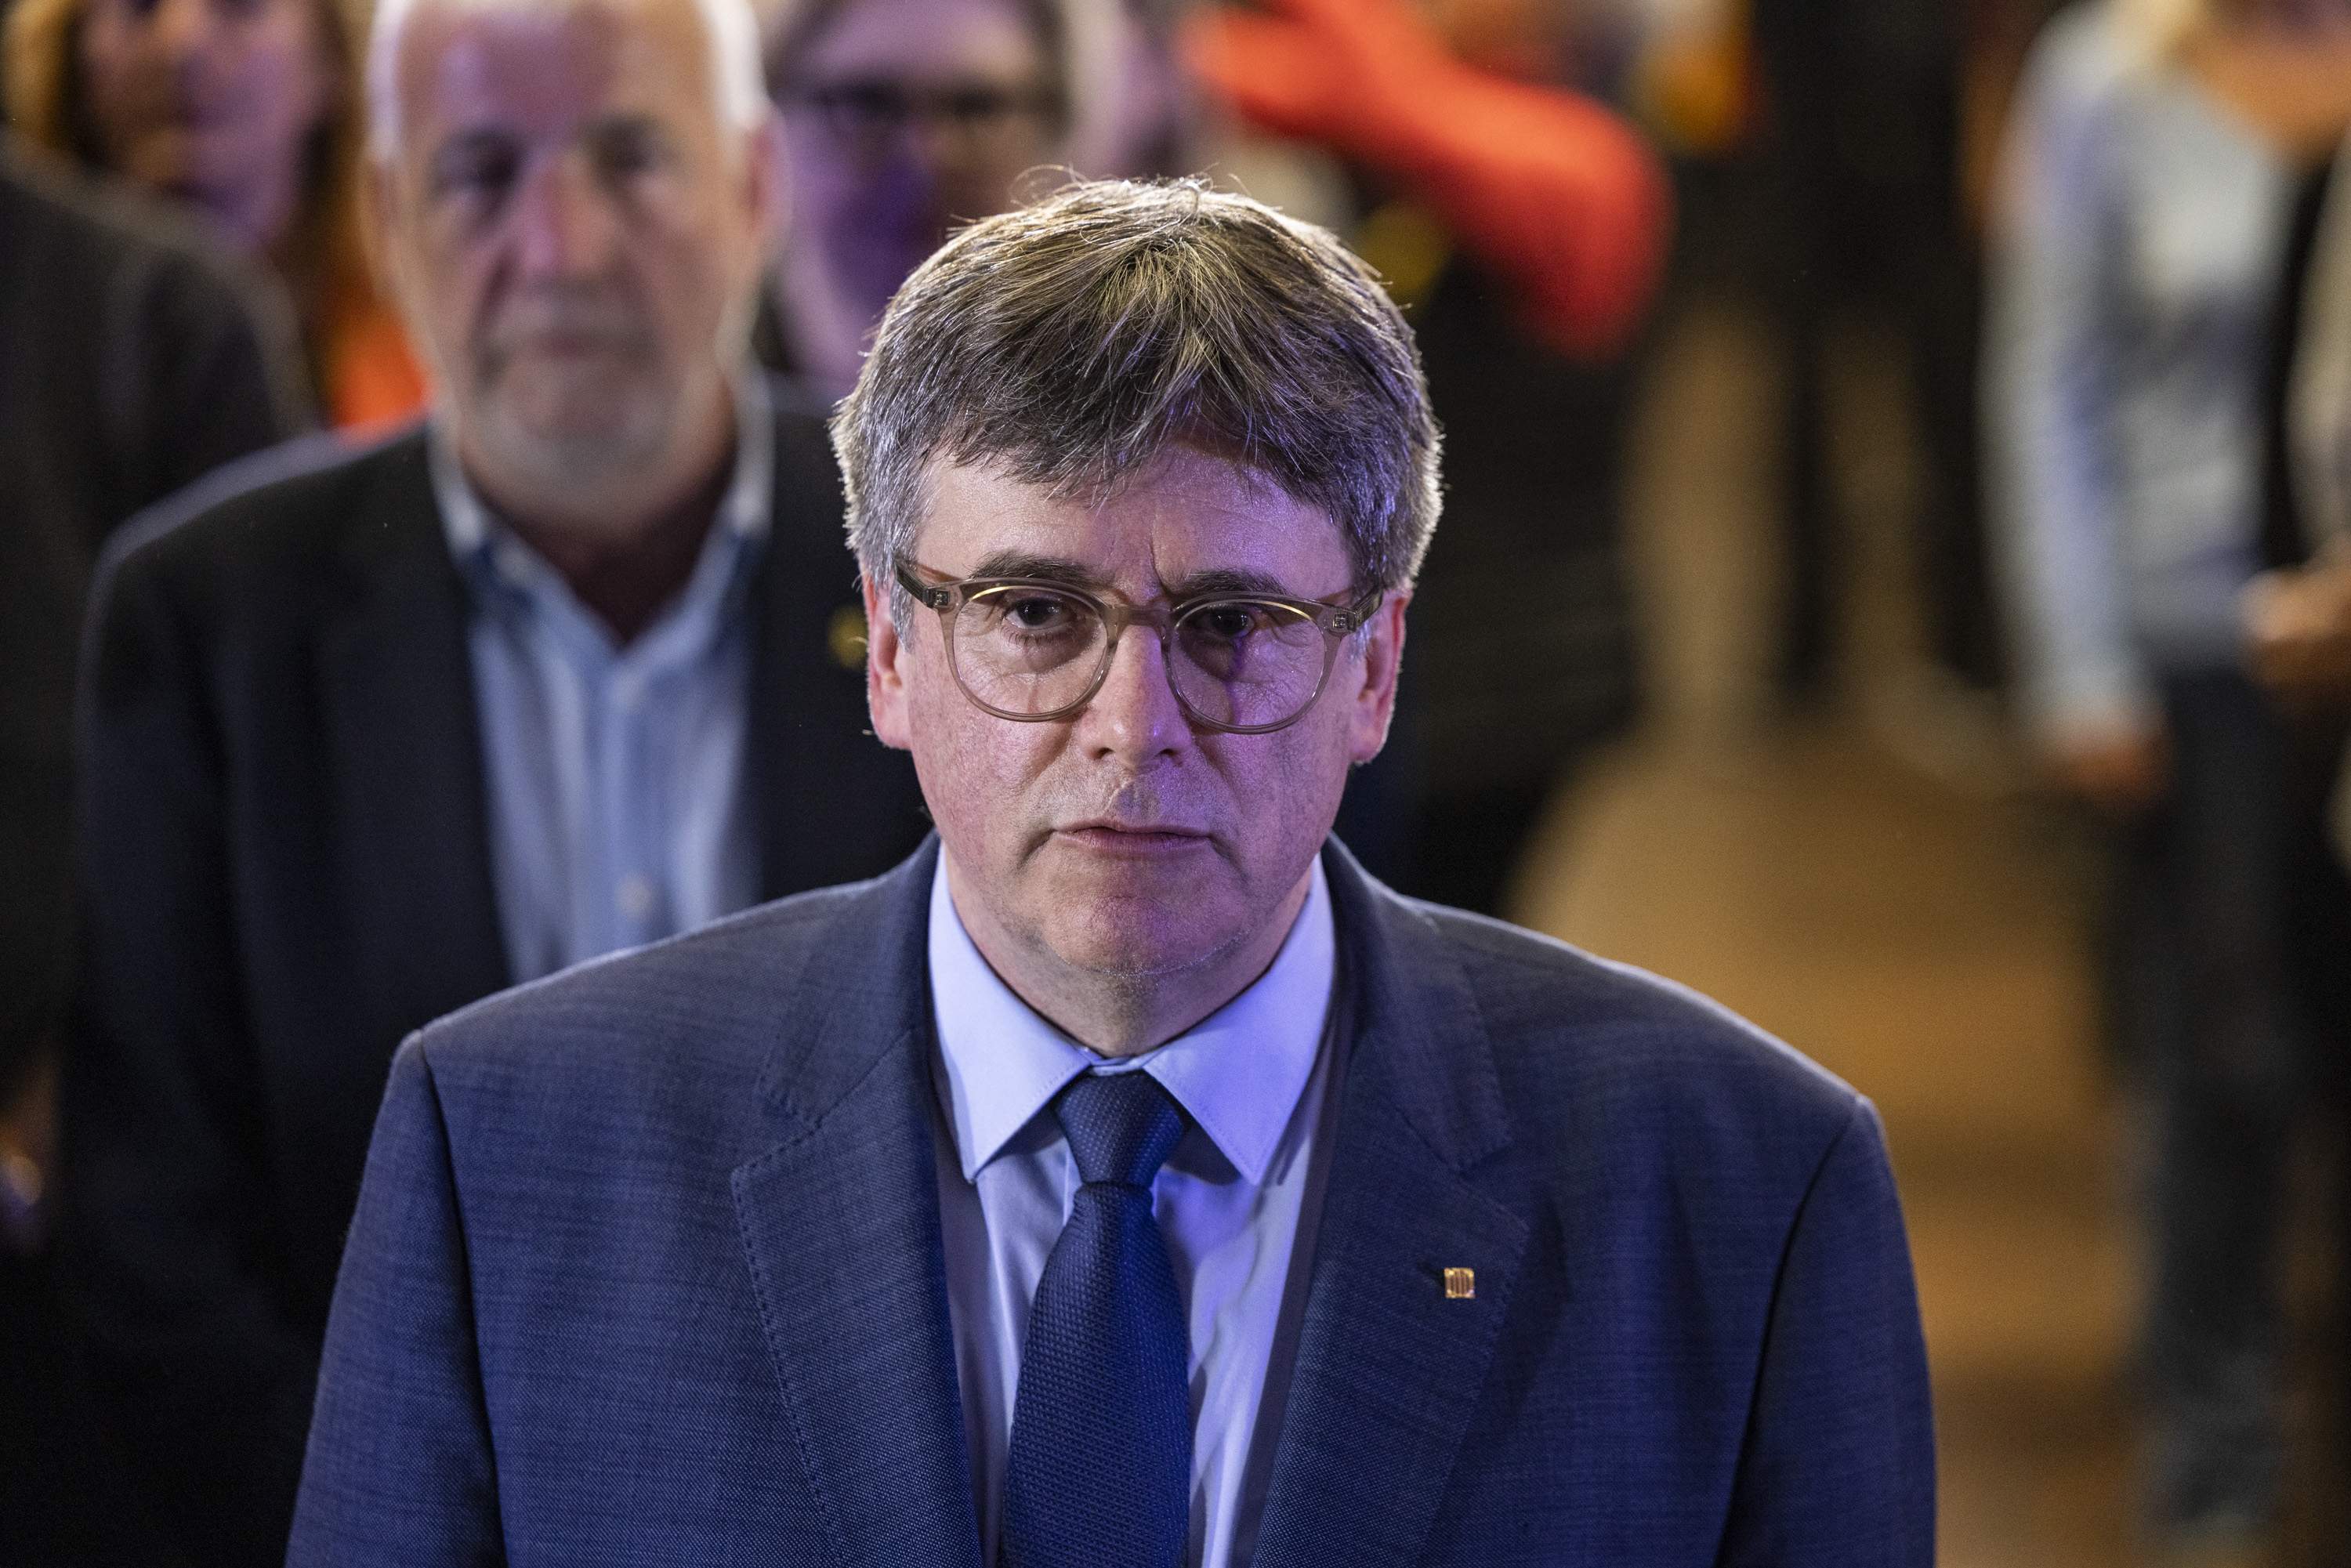 Carles Puigdemont's election candidature in Catalonia makes the international news